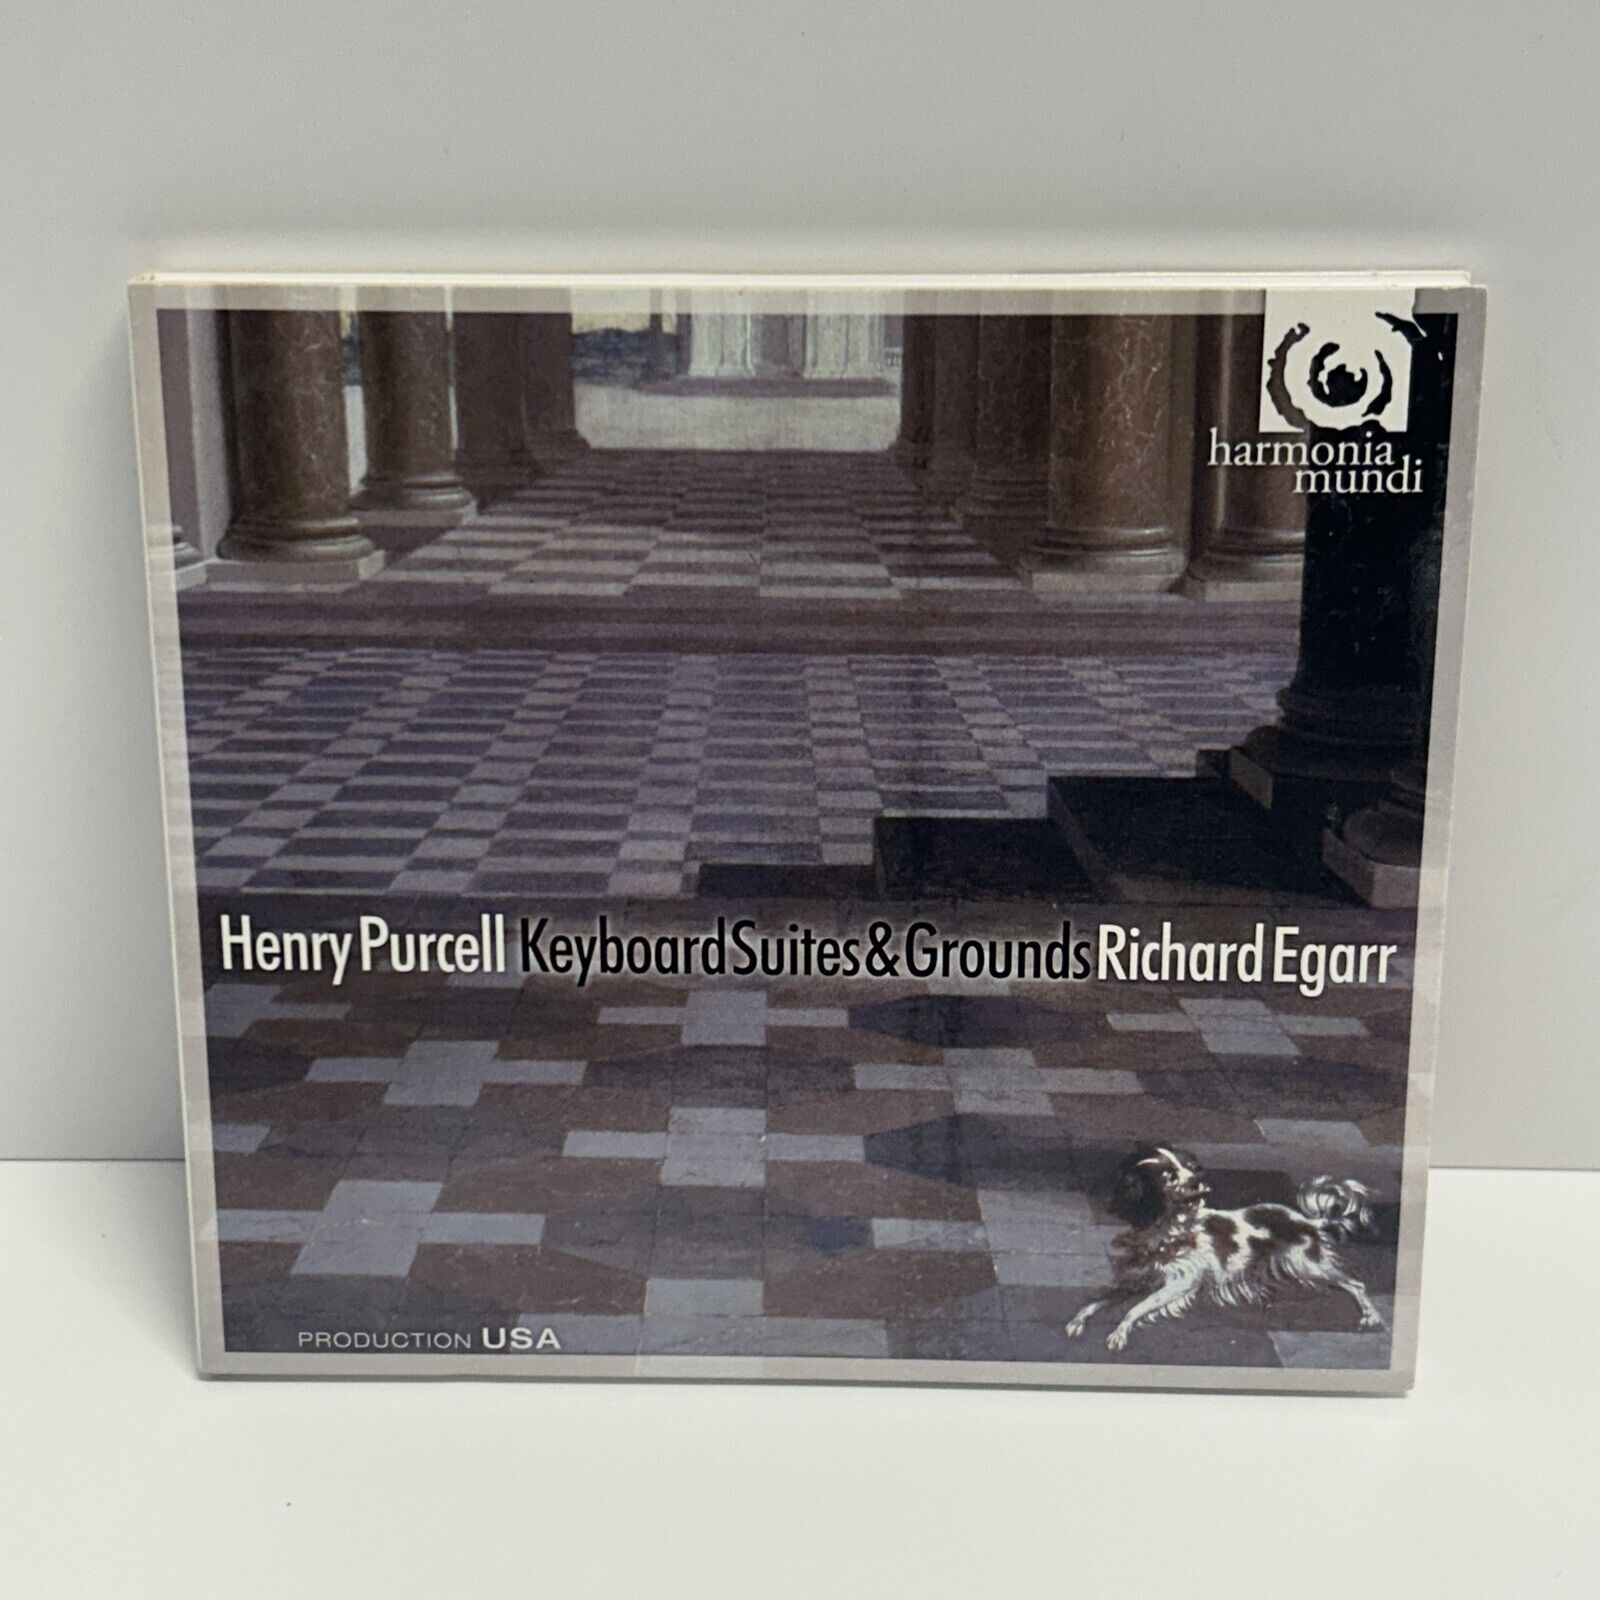 Henry Purcell: Keyboard Suites & Grounds CD Egarr - With Booklet - VG Used